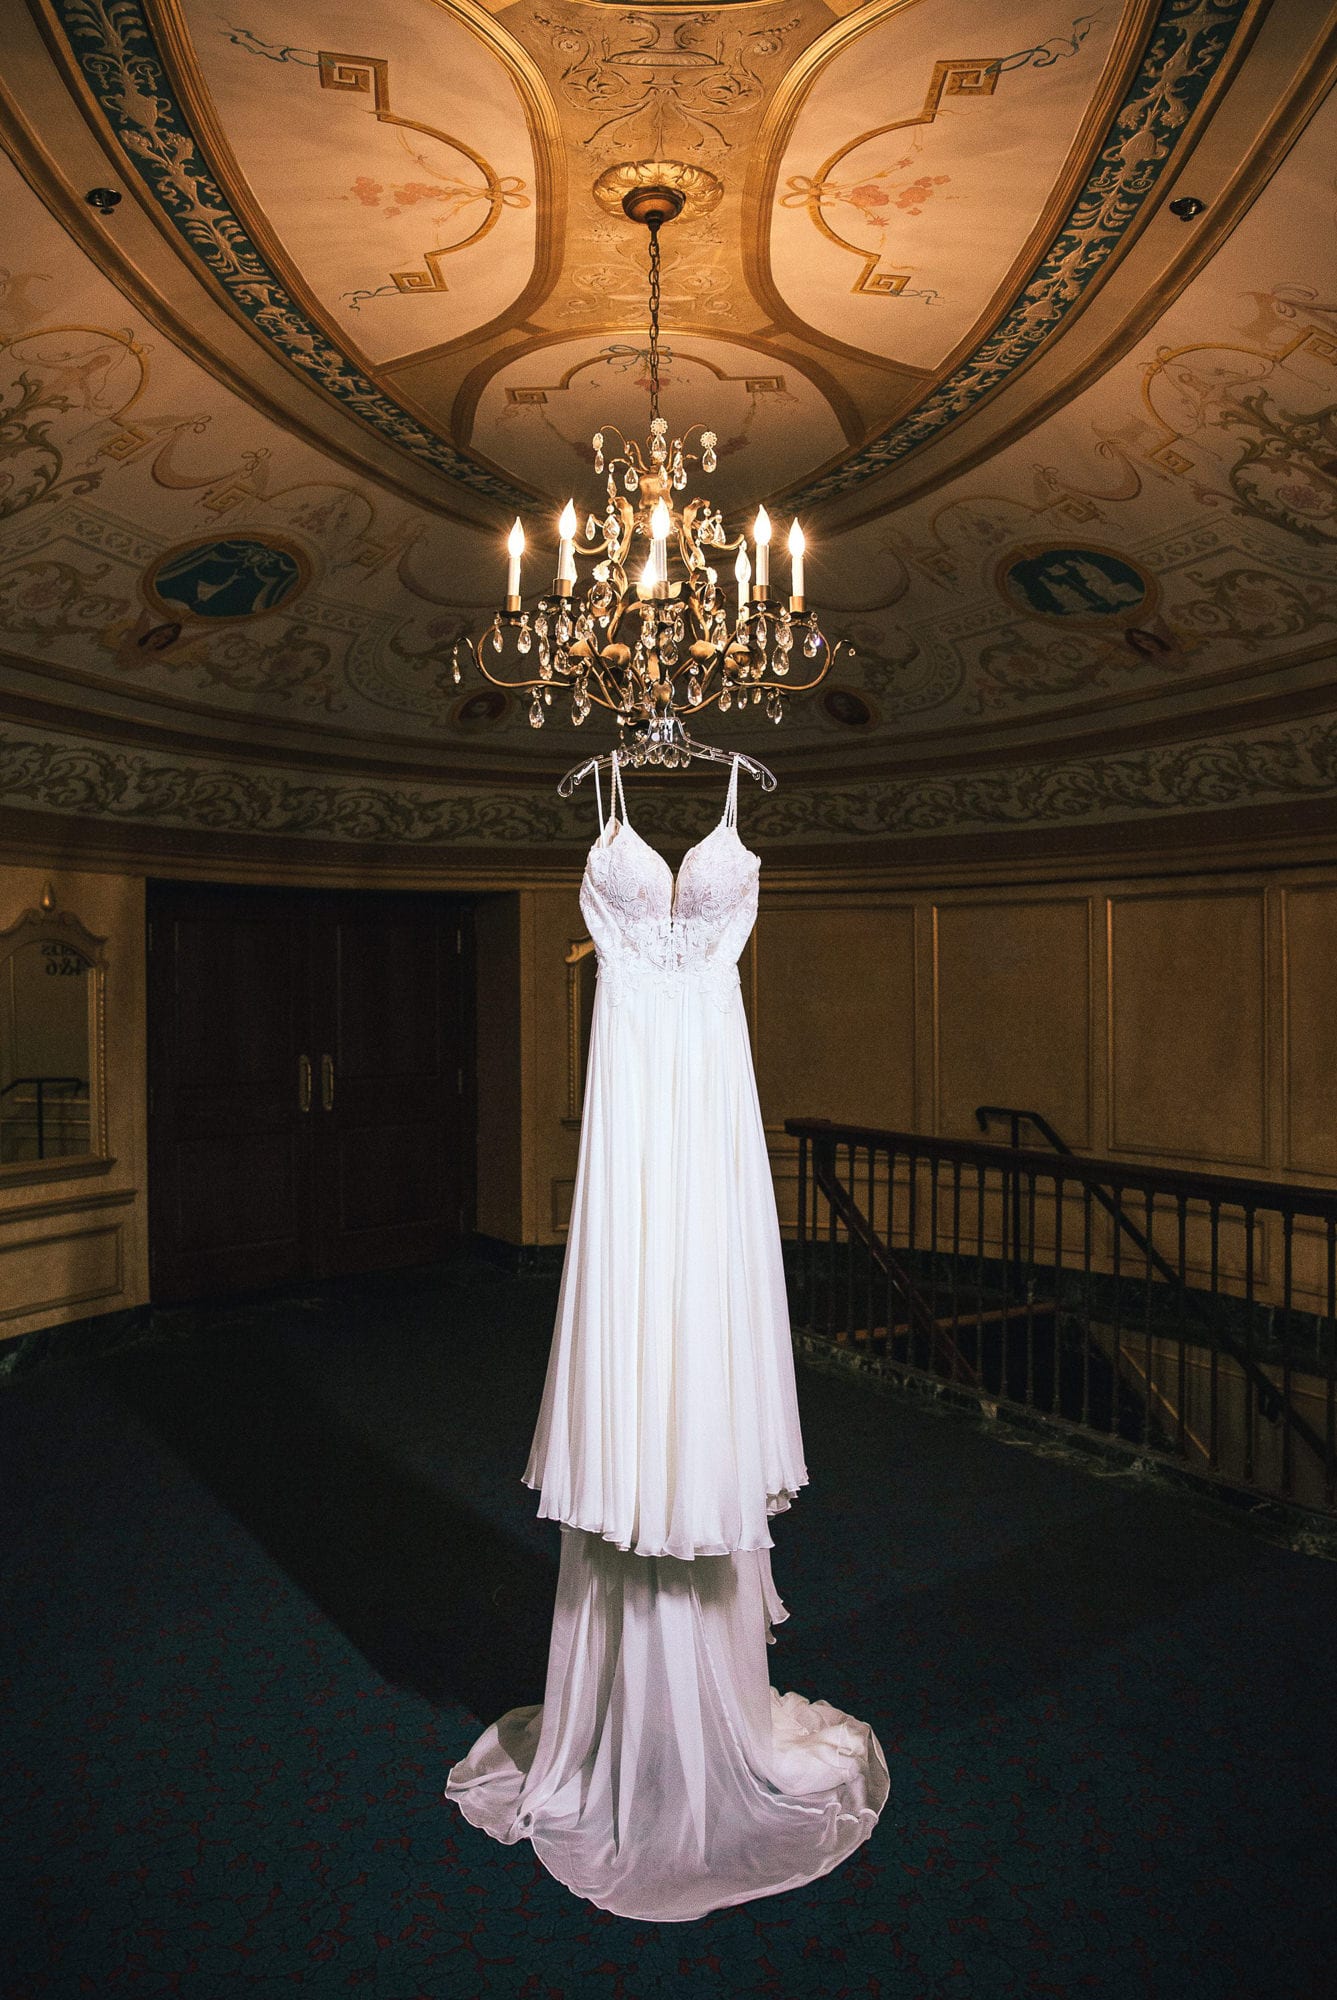 dress hanging from chandelier